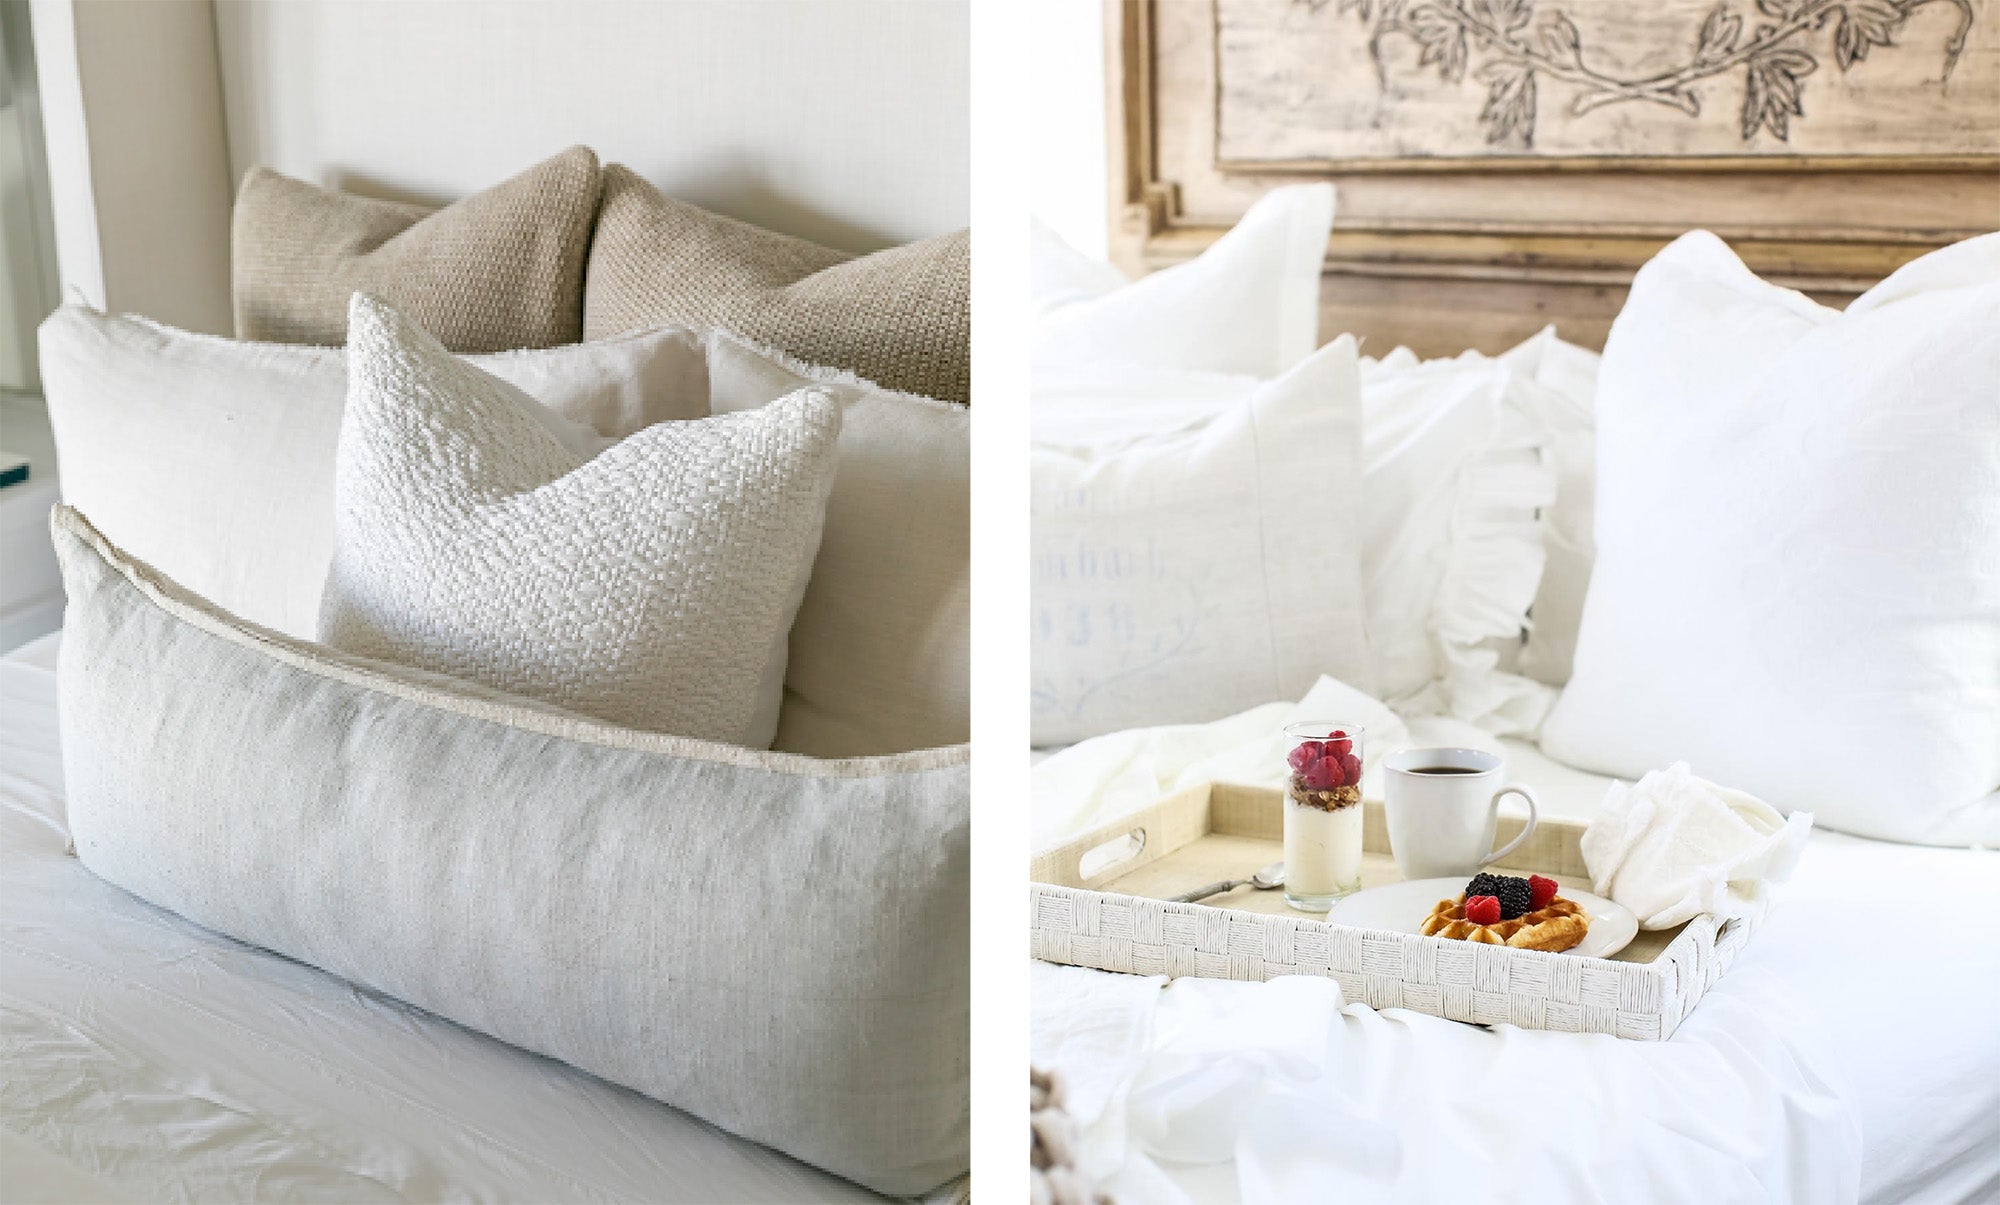 6 Ways to Arrange Your Bed Pillows